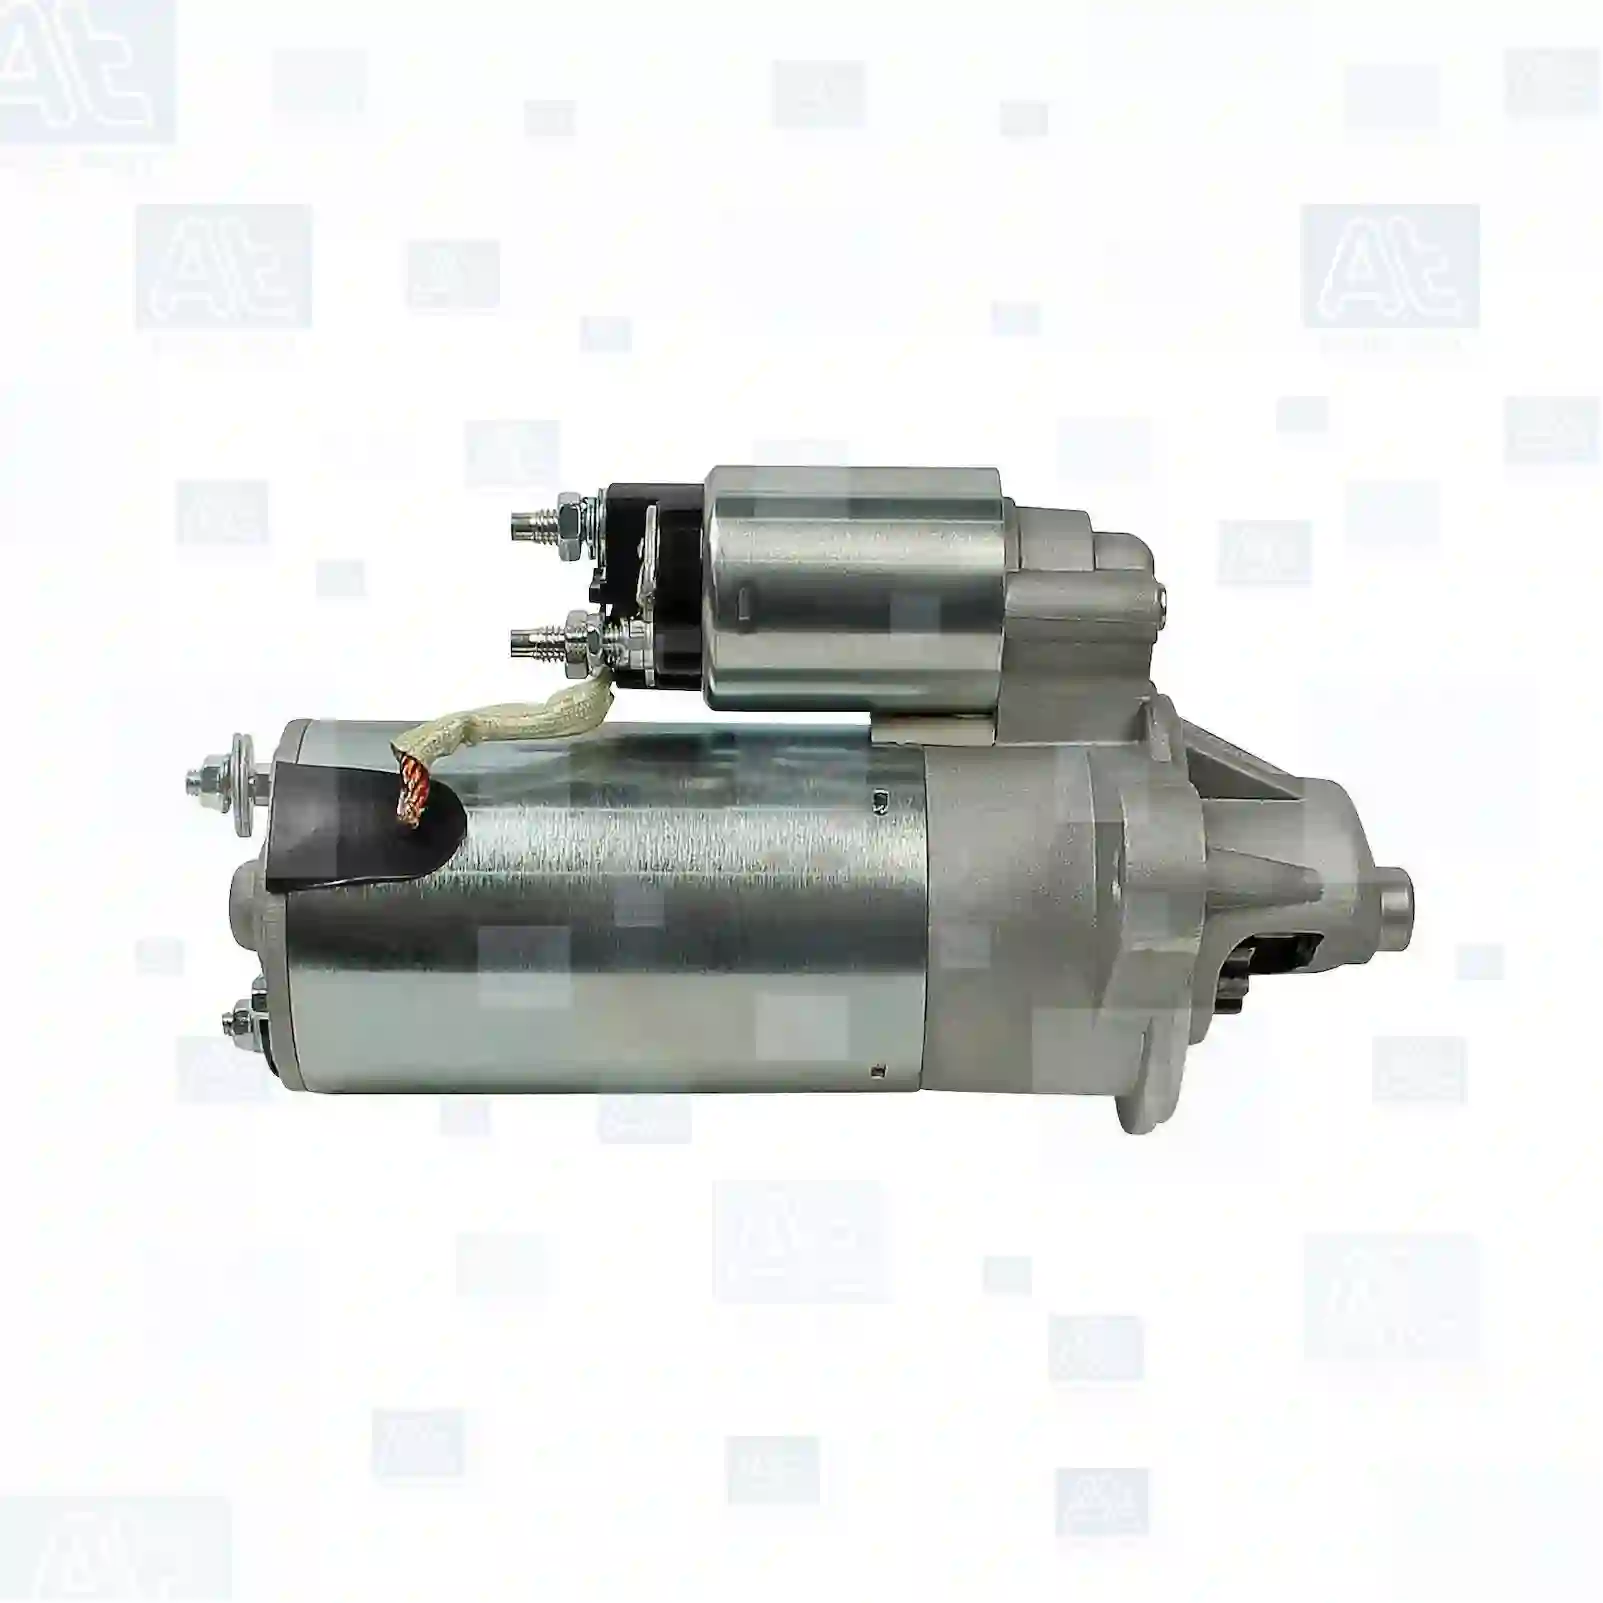 Starter, at no 77710220, oem no: 1516738, 1008823, 1416198, 1507703, 1564723, 1653206, 5003643, 6160440, 715F1-1000-JA, 715F1-1000-MA, 755F1-1000-AA, 755F1-1000-AB, 755F1-1000-BB, 795F1-1000-CA, 835F-11000-AB, 835F1-1000-AA, 835F1-1000-AC, 835F1-1000-BB, 835FX-11000-B, 835FX-11000-BB, 835X-11000-AC, R835X-11000-AC1, SS655, SS672 At Spare Part | Engine, Accelerator Pedal, Camshaft, Connecting Rod, Crankcase, Crankshaft, Cylinder Head, Engine Suspension Mountings, Exhaust Manifold, Exhaust Gas Recirculation, Filter Kits, Flywheel Housing, General Overhaul Kits, Engine, Intake Manifold, Oil Cleaner, Oil Cooler, Oil Filter, Oil Pump, Oil Sump, Piston & Liner, Sensor & Switch, Timing Case, Turbocharger, Cooling System, Belt Tensioner, Coolant Filter, Coolant Pipe, Corrosion Prevention Agent, Drive, Expansion Tank, Fan, Intercooler, Monitors & Gauges, Radiator, Thermostat, V-Belt / Timing belt, Water Pump, Fuel System, Electronical Injector Unit, Feed Pump, Fuel Filter, cpl., Fuel Gauge Sender,  Fuel Line, Fuel Pump, Fuel Tank, Injection Line Kit, Injection Pump, Exhaust System, Clutch & Pedal, Gearbox, Propeller Shaft, Axles, Brake System, Hubs & Wheels, Suspension, Leaf Spring, Universal Parts / Accessories, Steering, Electrical System, Cabin Starter, at no 77710220, oem no: 1516738, 1008823, 1416198, 1507703, 1564723, 1653206, 5003643, 6160440, 715F1-1000-JA, 715F1-1000-MA, 755F1-1000-AA, 755F1-1000-AB, 755F1-1000-BB, 795F1-1000-CA, 835F-11000-AB, 835F1-1000-AA, 835F1-1000-AC, 835F1-1000-BB, 835FX-11000-B, 835FX-11000-BB, 835X-11000-AC, R835X-11000-AC1, SS655, SS672 At Spare Part | Engine, Accelerator Pedal, Camshaft, Connecting Rod, Crankcase, Crankshaft, Cylinder Head, Engine Suspension Mountings, Exhaust Manifold, Exhaust Gas Recirculation, Filter Kits, Flywheel Housing, General Overhaul Kits, Engine, Intake Manifold, Oil Cleaner, Oil Cooler, Oil Filter, Oil Pump, Oil Sump, Piston & Liner, Sensor & Switch, Timing Case, Turbocharger, Cooling System, Belt Tensioner, Coolant Filter, Coolant Pipe, Corrosion Prevention Agent, Drive, Expansion Tank, Fan, Intercooler, Monitors & Gauges, Radiator, Thermostat, V-Belt / Timing belt, Water Pump, Fuel System, Electronical Injector Unit, Feed Pump, Fuel Filter, cpl., Fuel Gauge Sender,  Fuel Line, Fuel Pump, Fuel Tank, Injection Line Kit, Injection Pump, Exhaust System, Clutch & Pedal, Gearbox, Propeller Shaft, Axles, Brake System, Hubs & Wheels, Suspension, Leaf Spring, Universal Parts / Accessories, Steering, Electrical System, Cabin